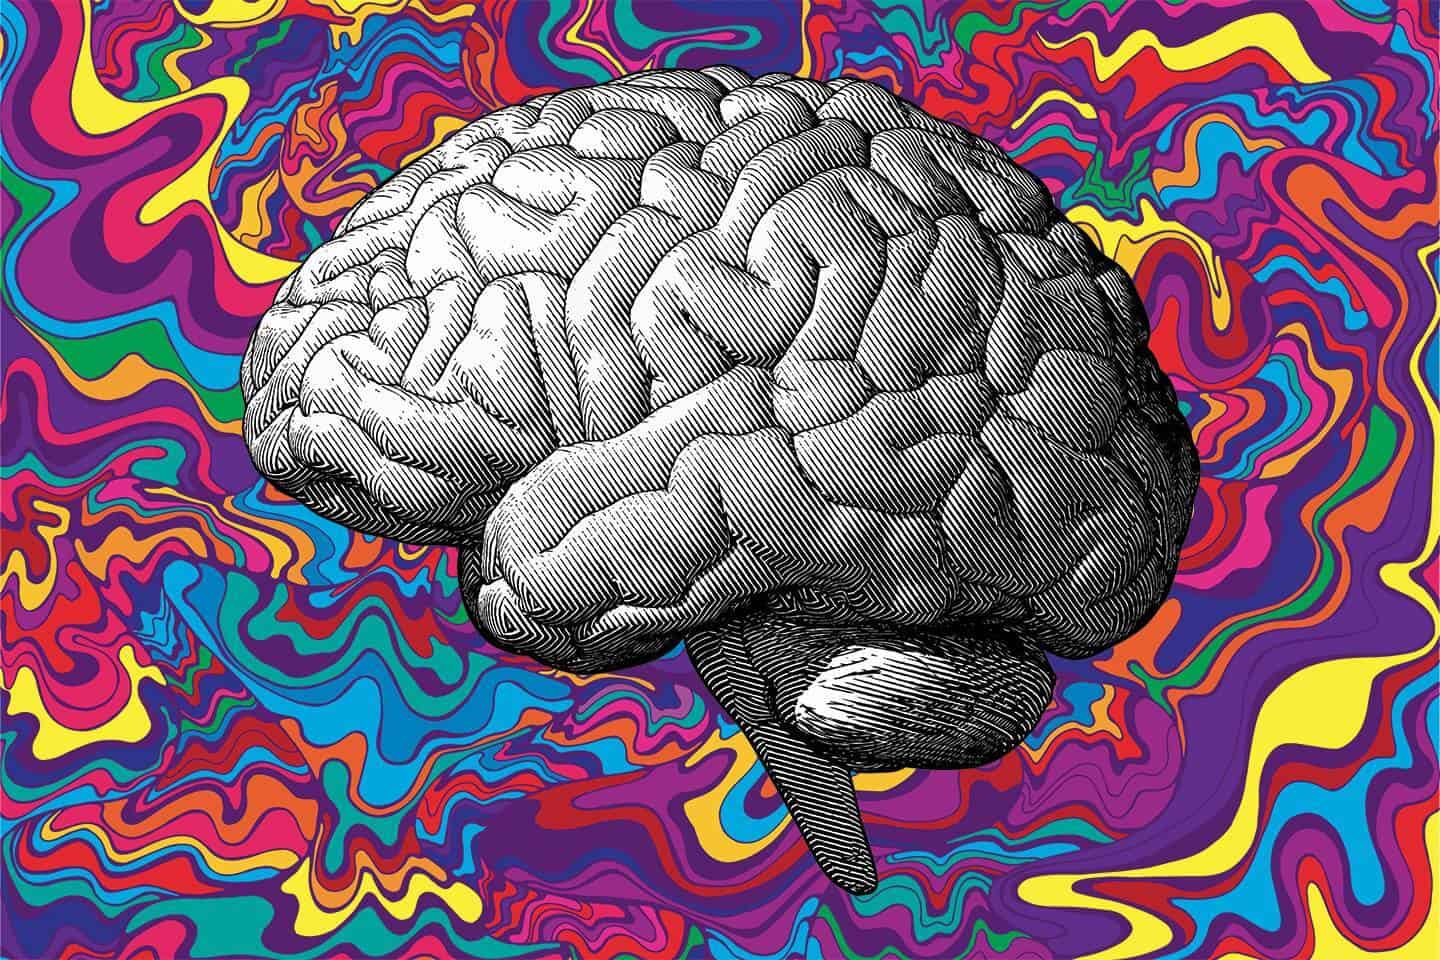 A sketched brain surrounded with swirling vibrant paint.